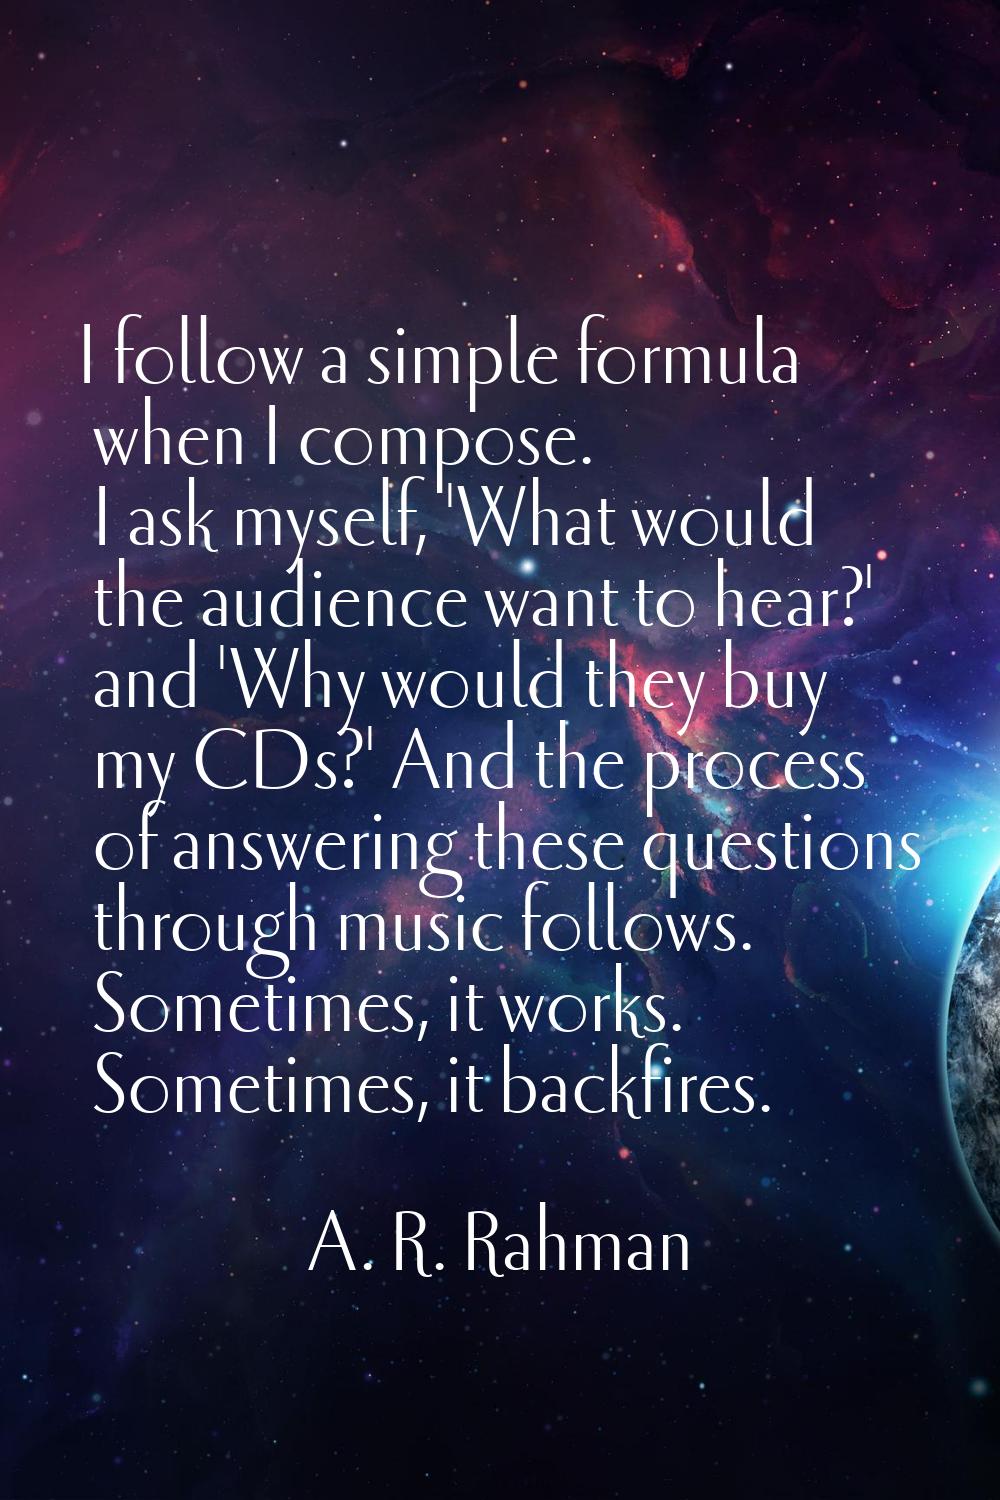 I follow a simple formula when I compose. I ask myself, 'What would the audience want to hear?' and